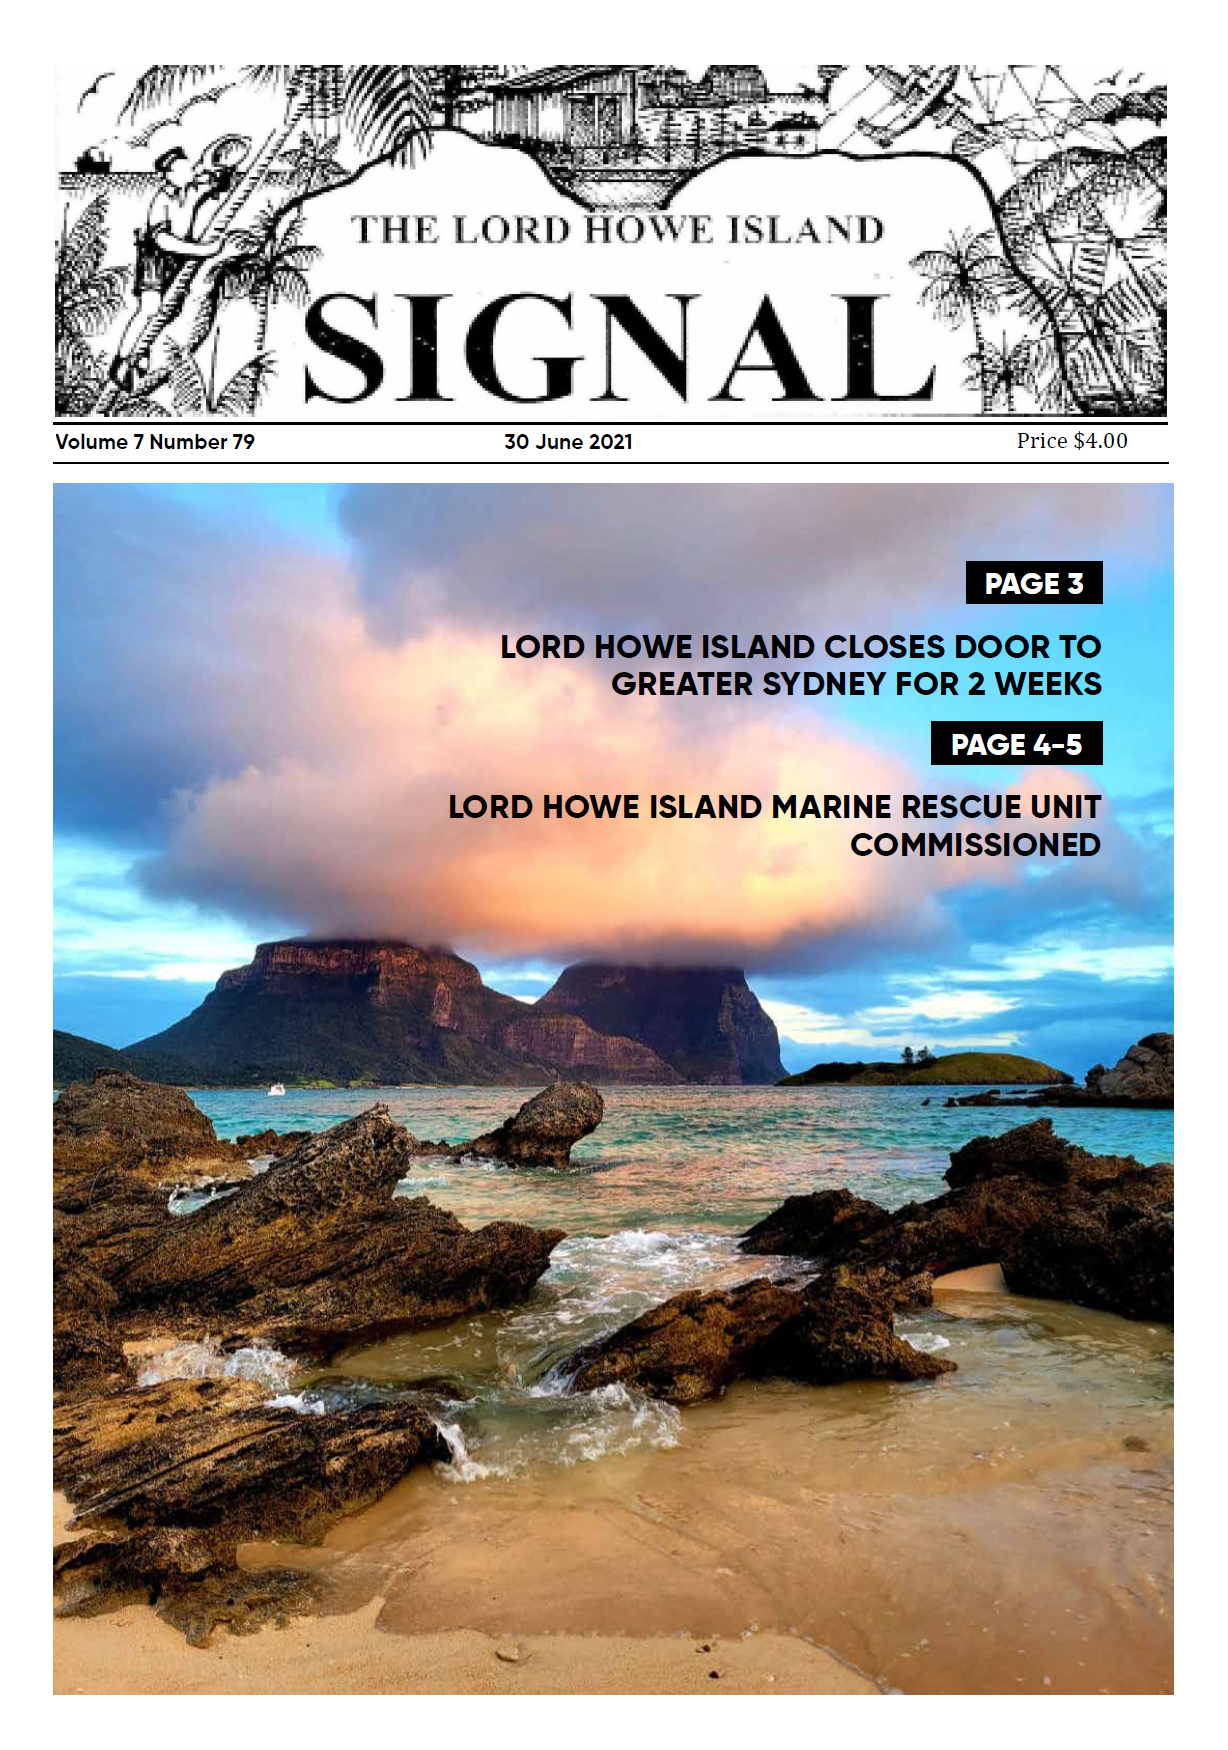 The Lord Howe Island Signal 30 June 2021